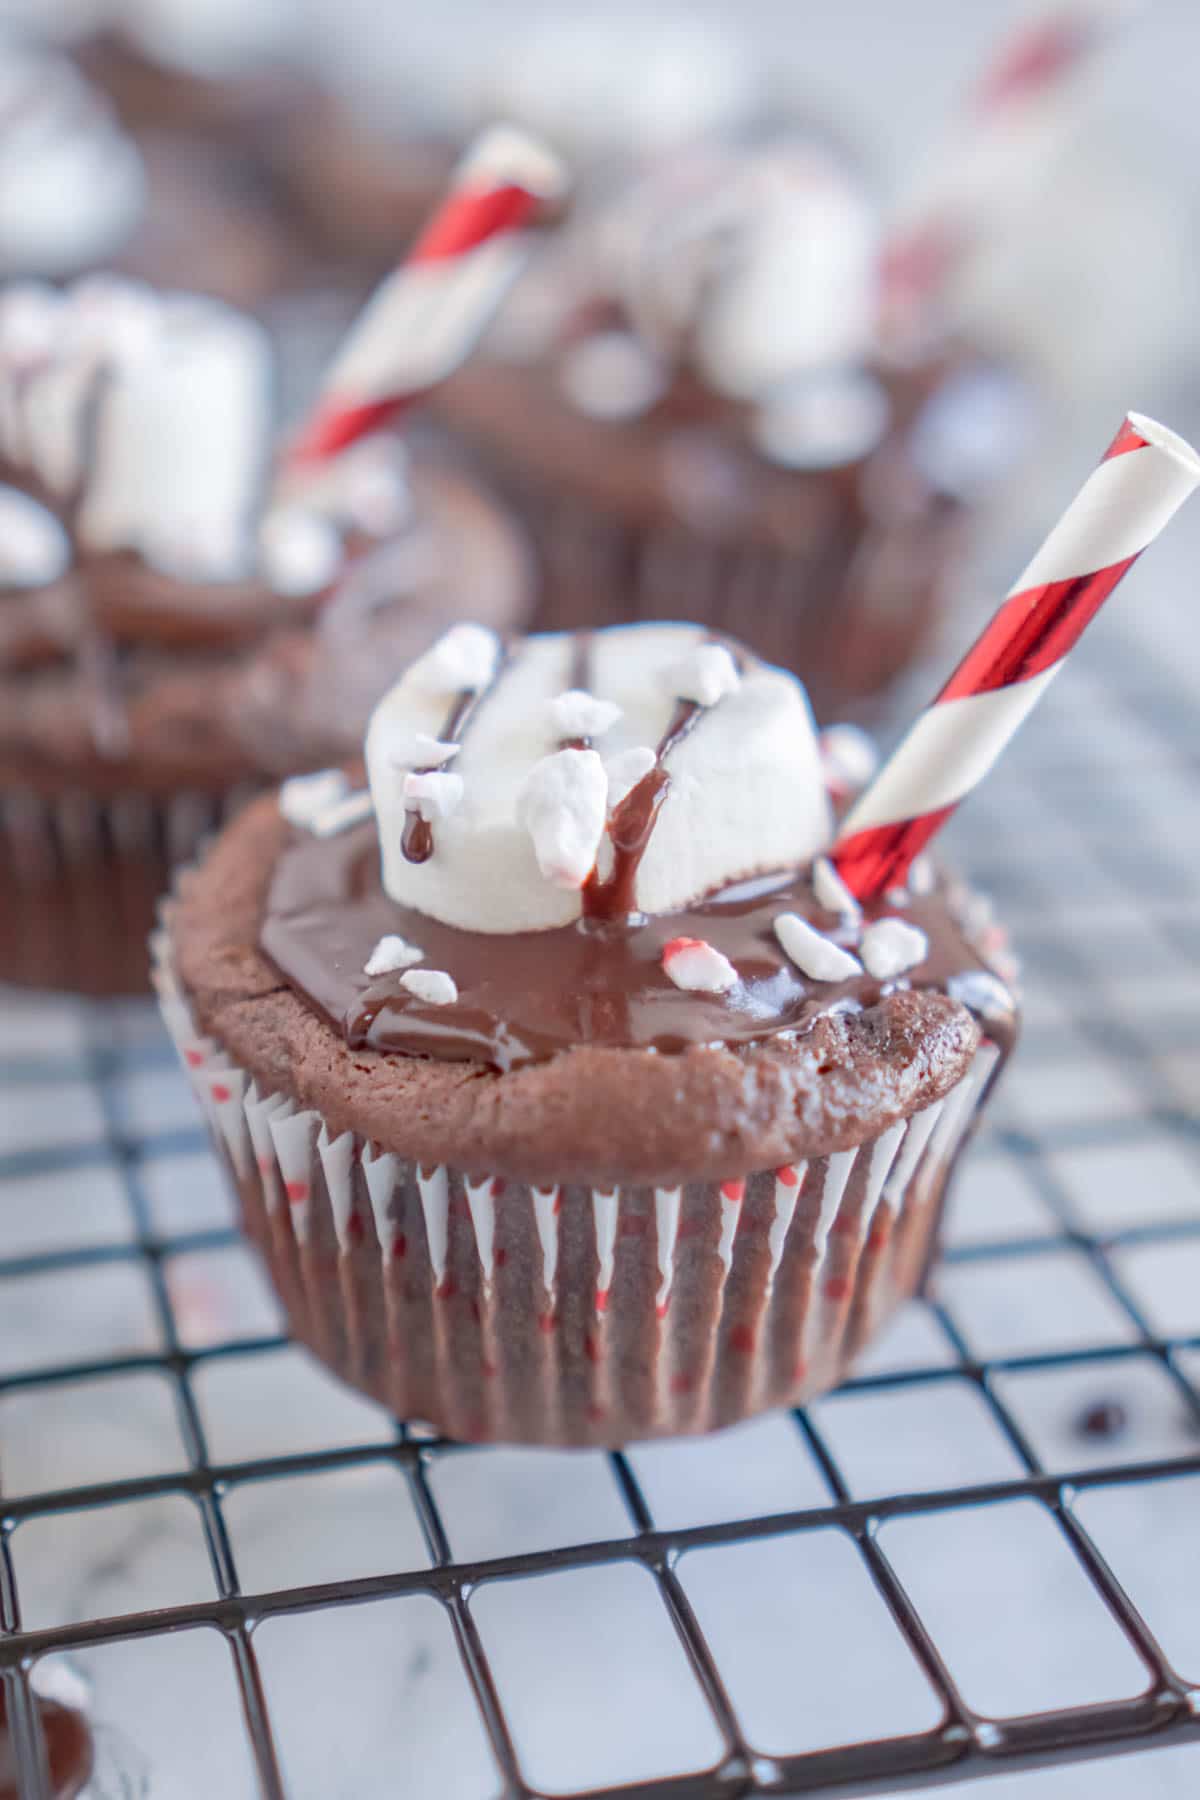 Hot chocolate cupcakes on a baking rack